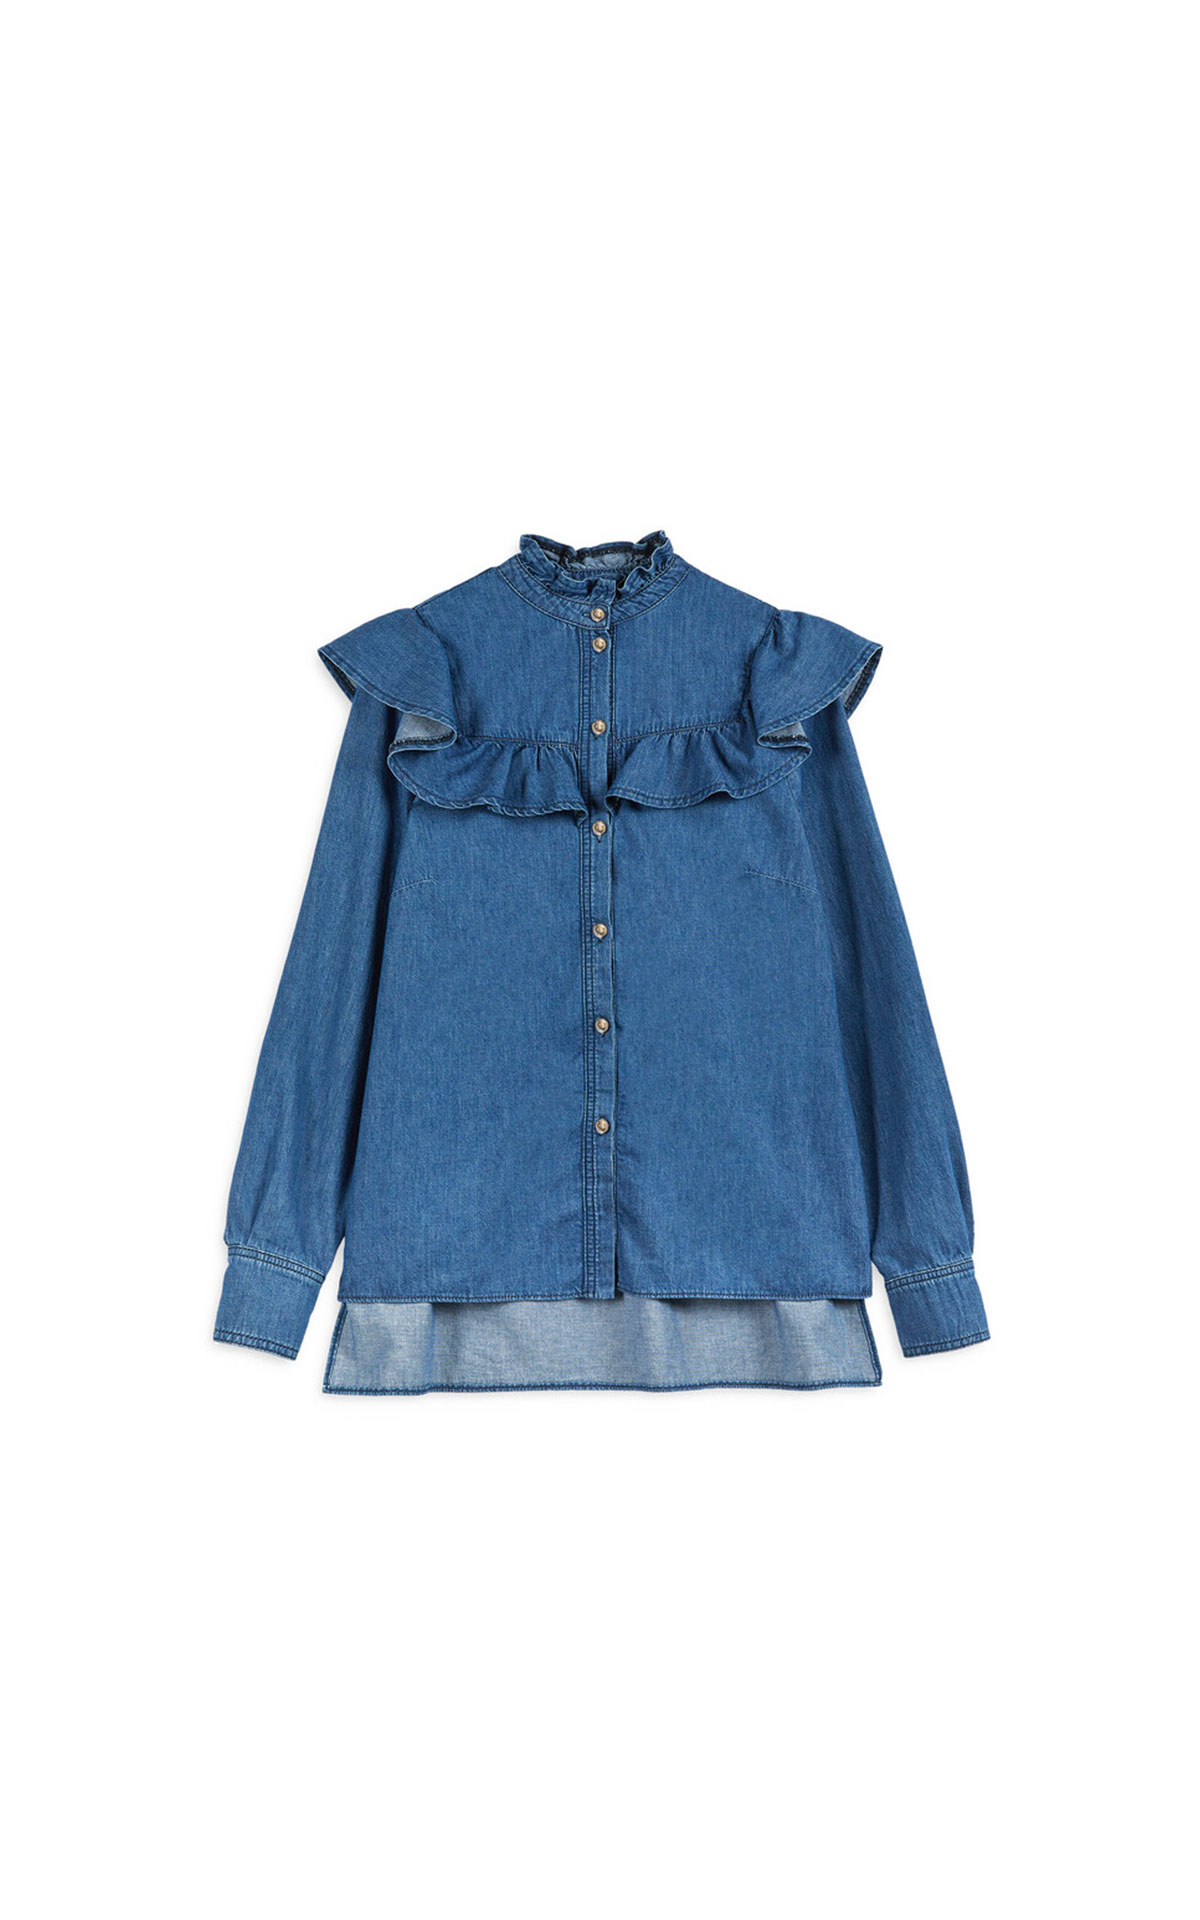 Ted Baker Denim button front top from Bicester Village